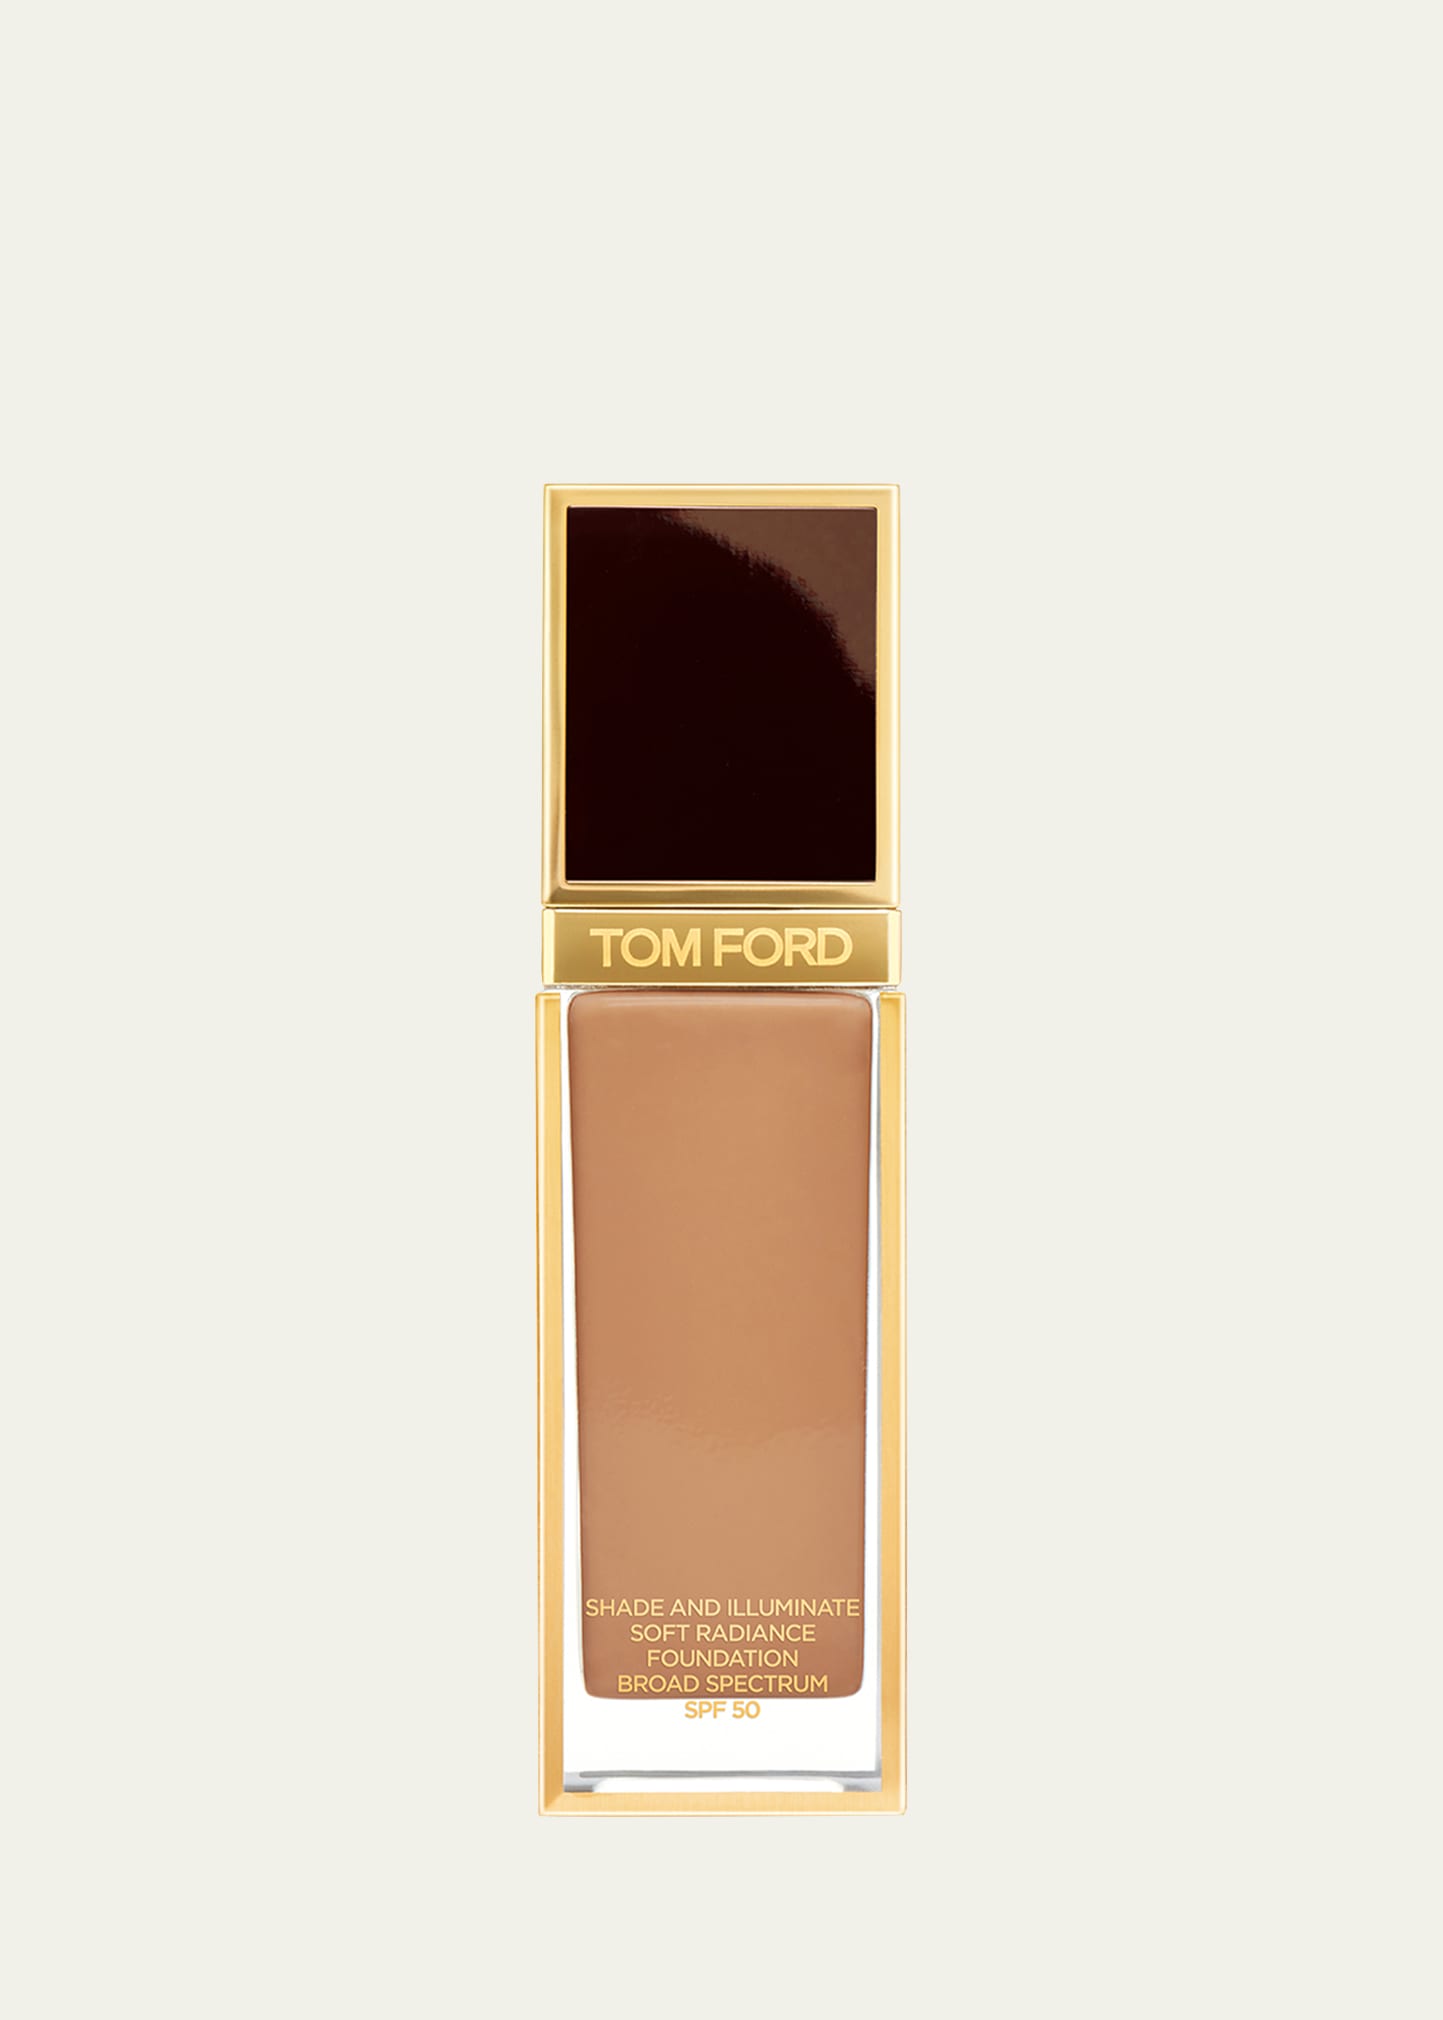 Tom Ford 1 Oz. Shade And Illuminate Soft Radiance Foundation Spf 50 In 9.5 Warm Almond